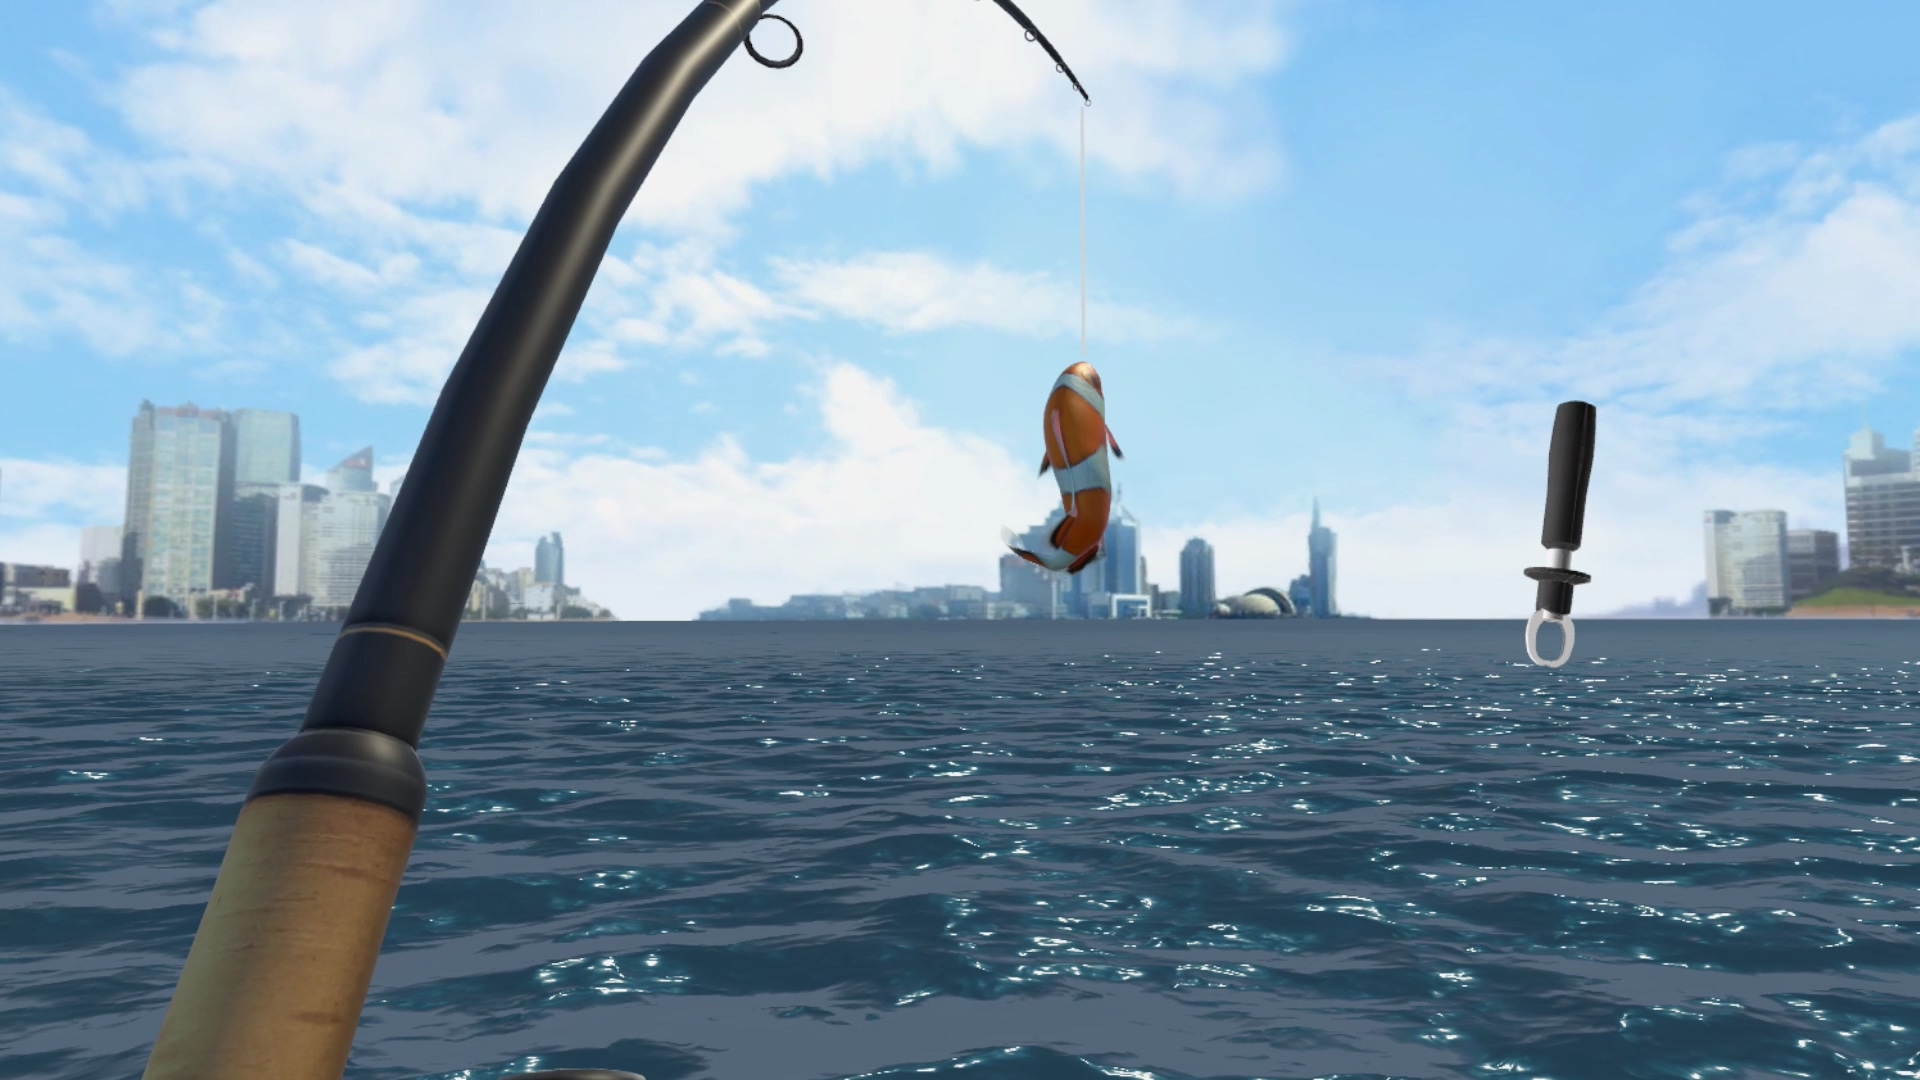 Real Fishing VR Free Download